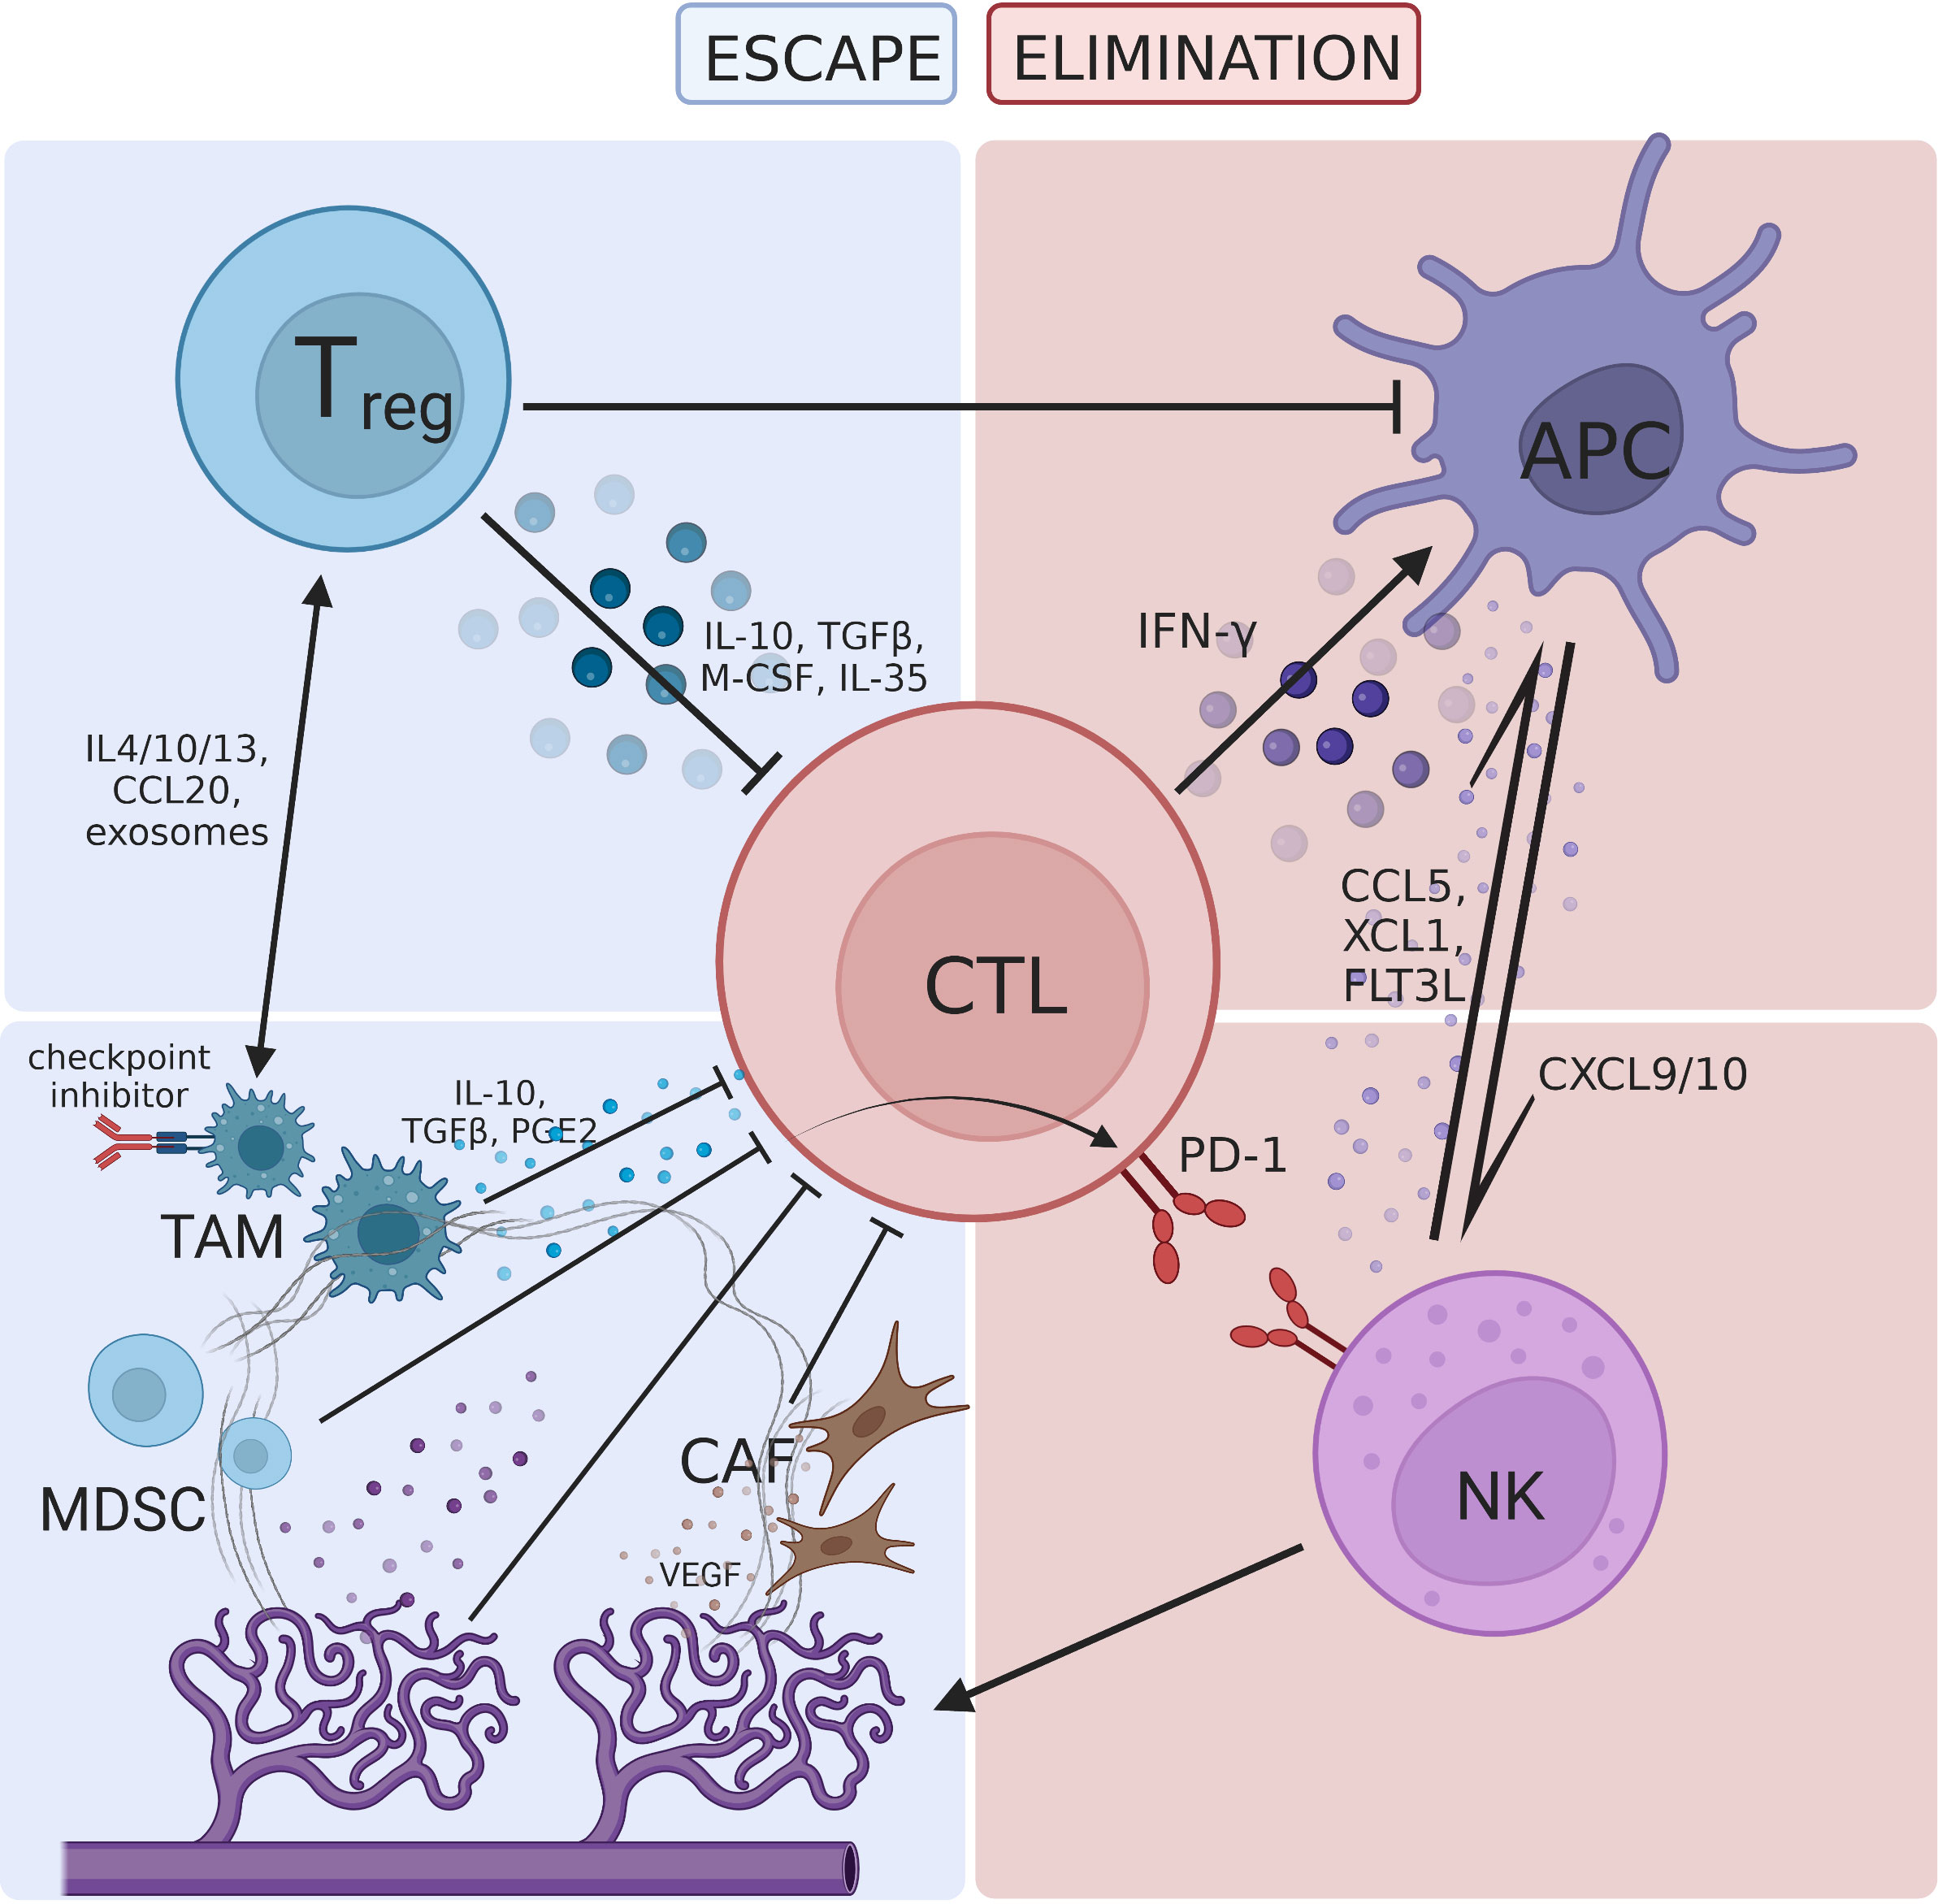 Frontiers  Molecular mechanisms of immunotherapy resistance in triple-negative  breast cancer